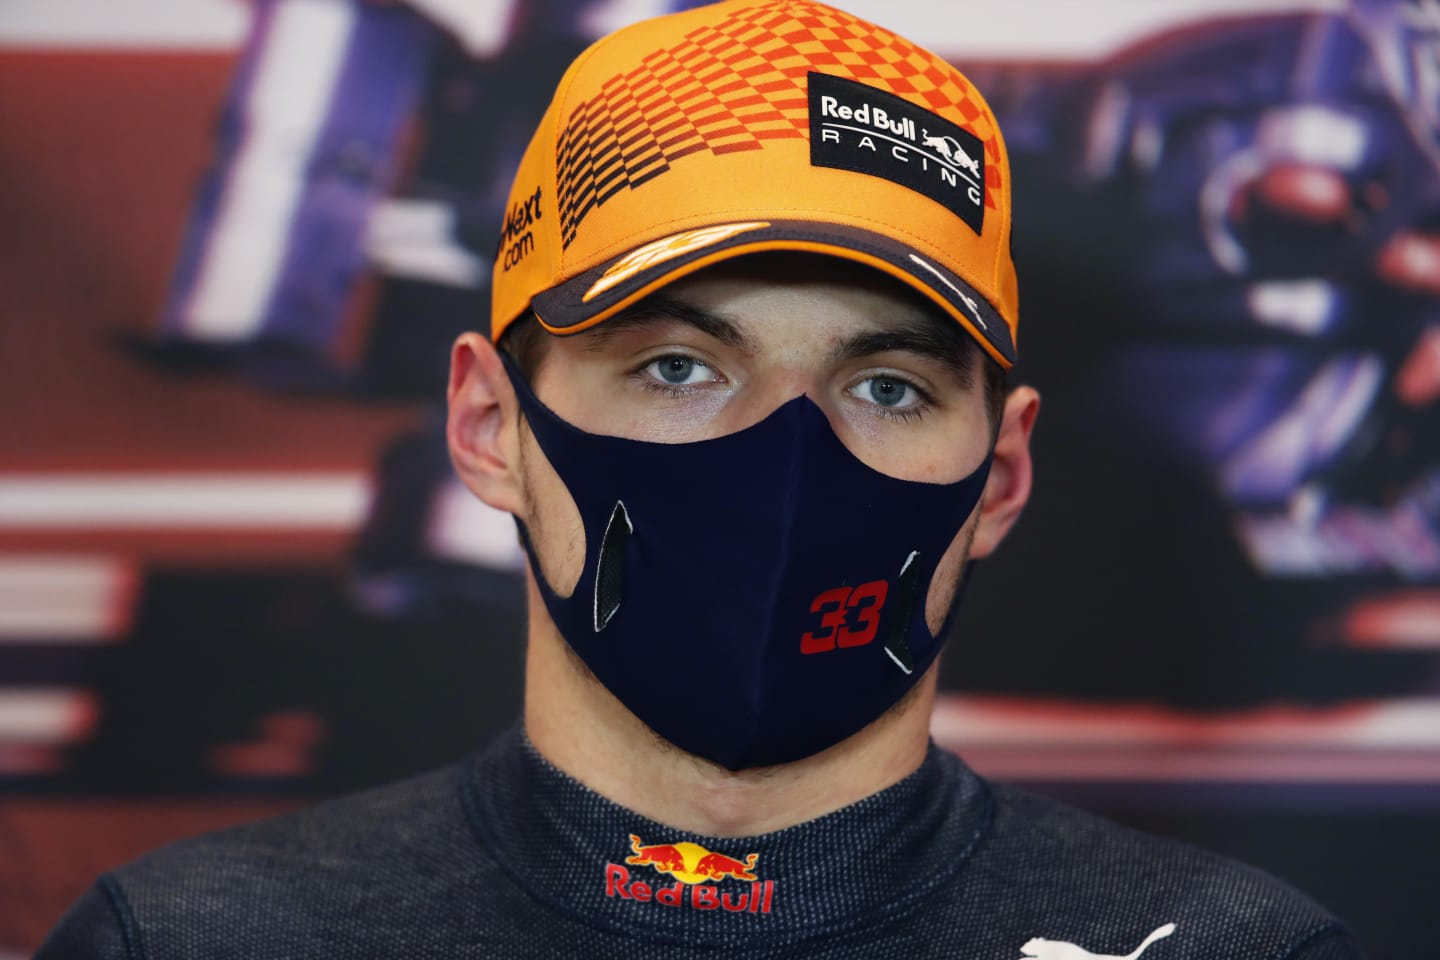 MONTE-CARLO, MONACO - MAY 22: Second placed qualifier Max Verstappen of Netherlands and Red Bull Racing talks during a Press Conference after qualifying prior to the F1 Grand Prix of Monaco at Circuit de Monaco on May 22, 2021 in Monte-Carlo, Monaco. (Photo by Pool/Getty Images)